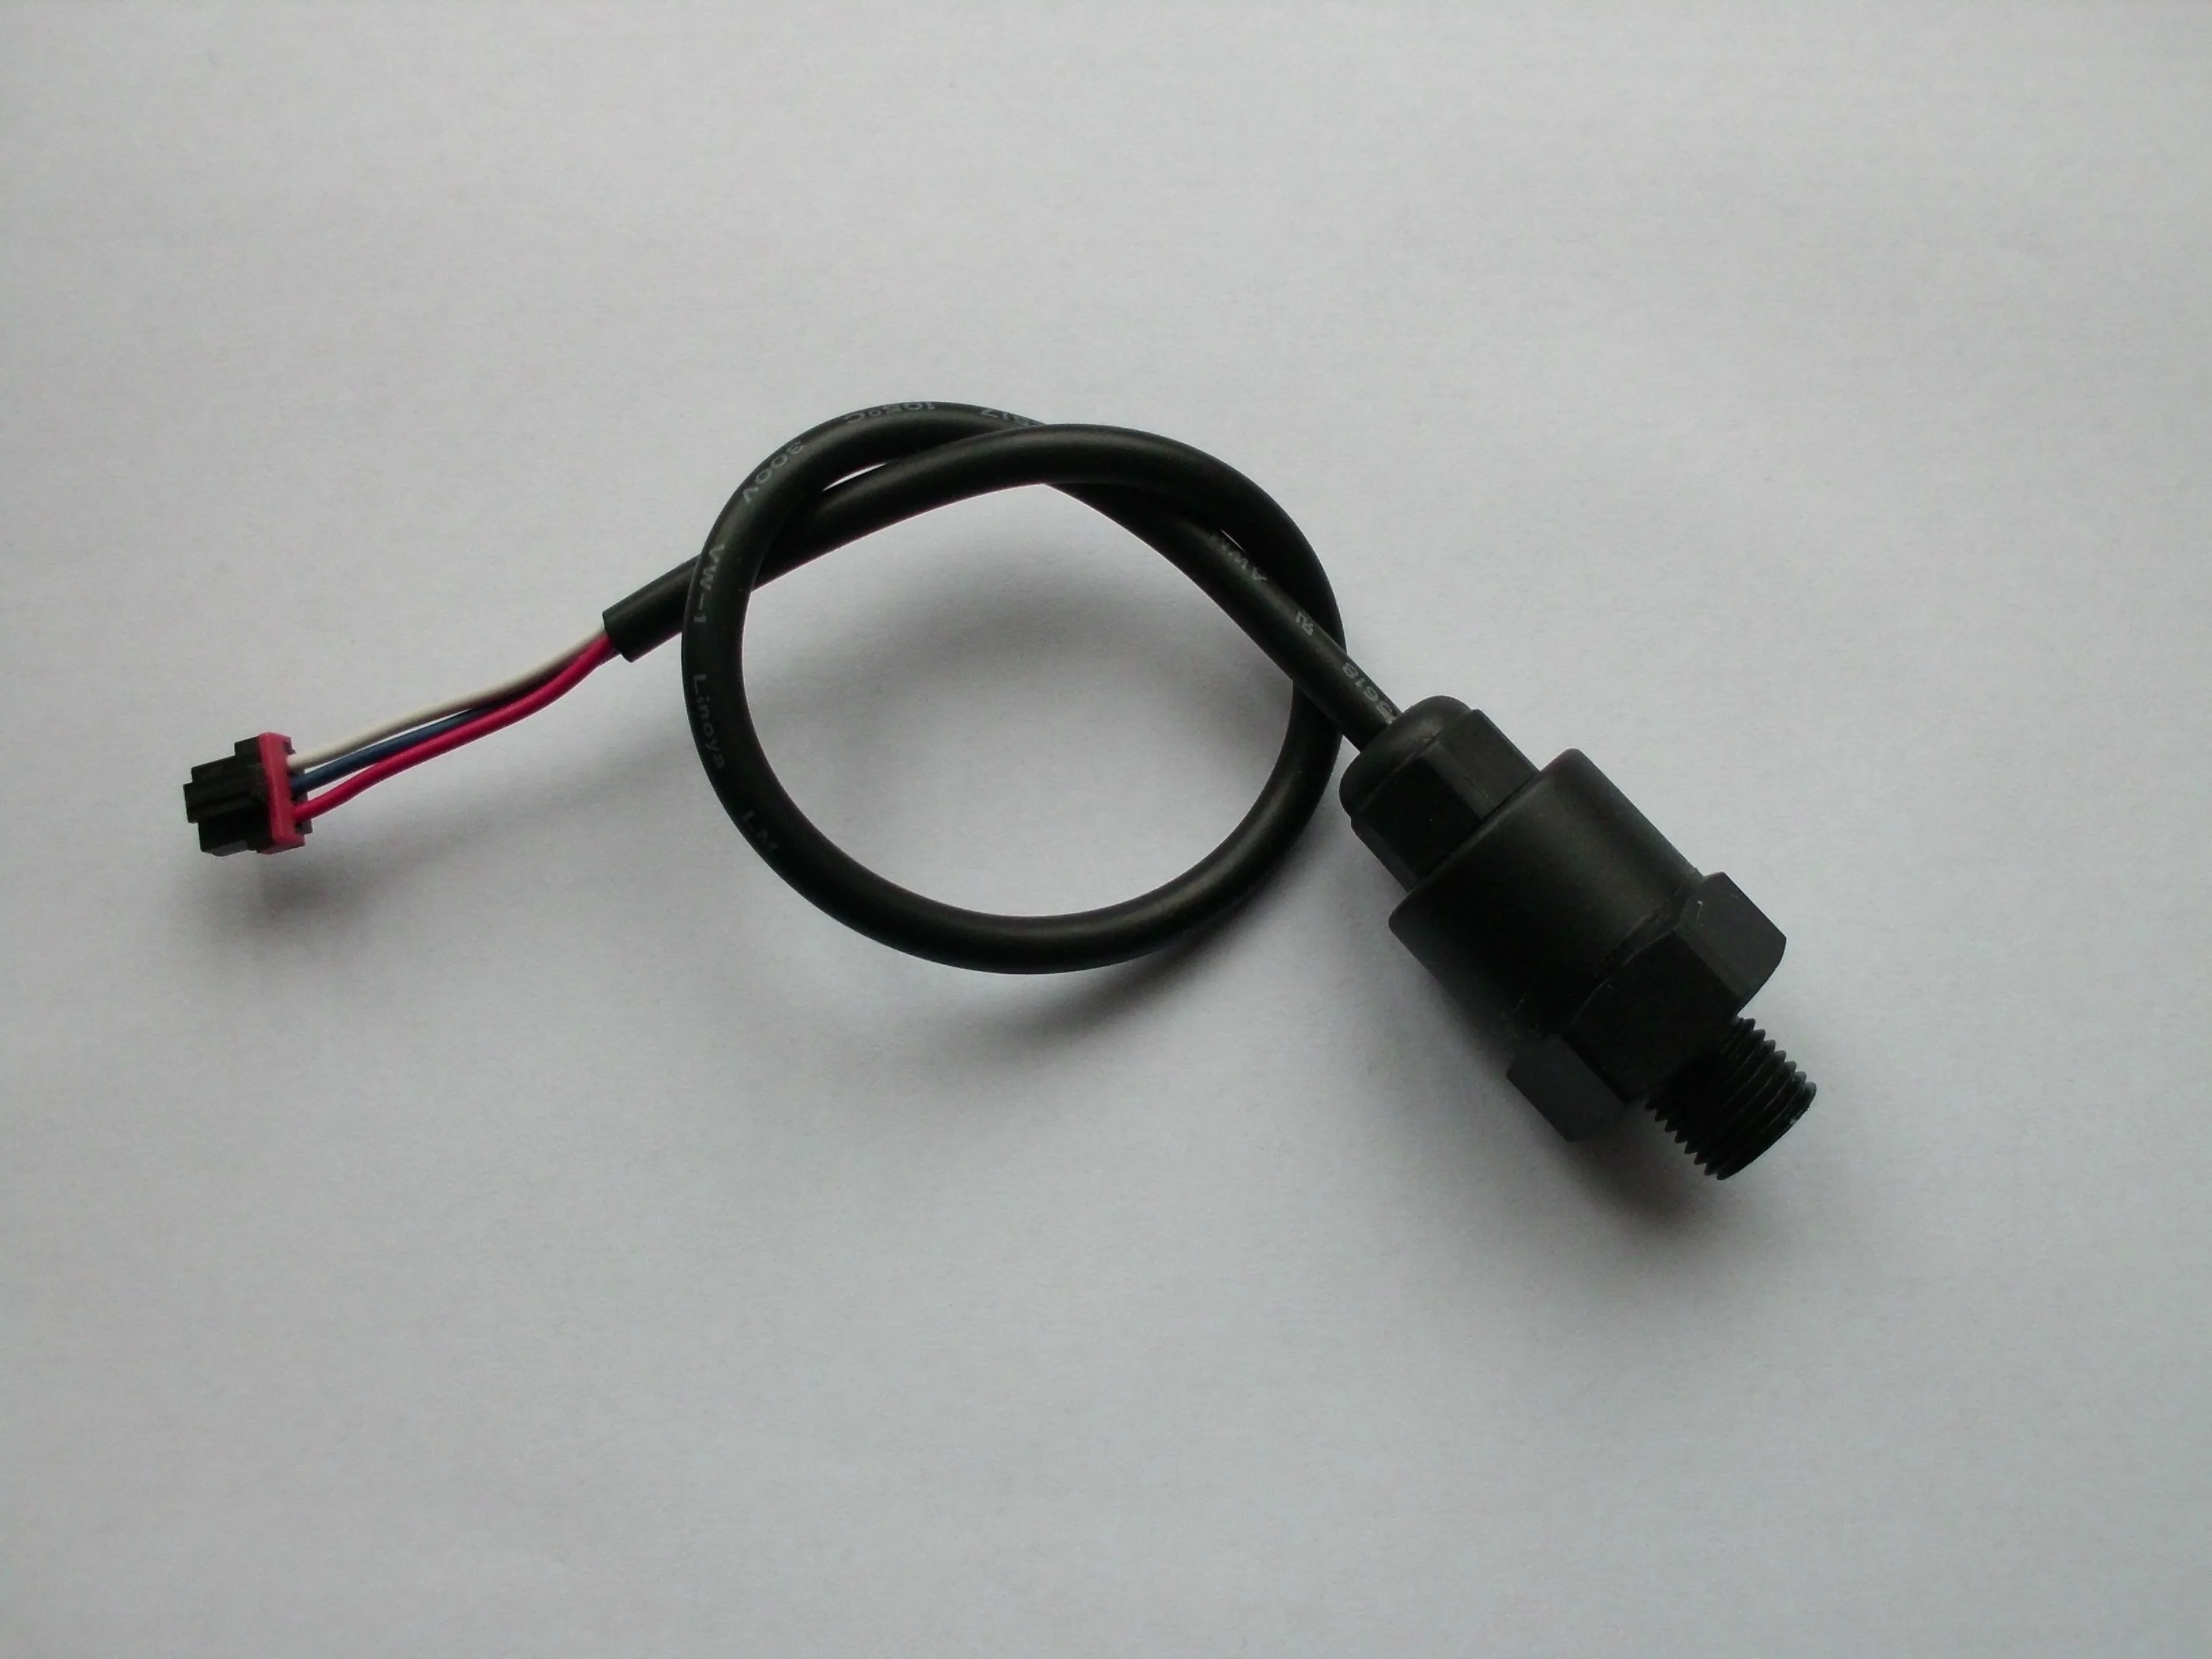 ForWater pressure sensor of water pump 0.5-4.5V signal output suitable for connecting water pump controller PLC inverter